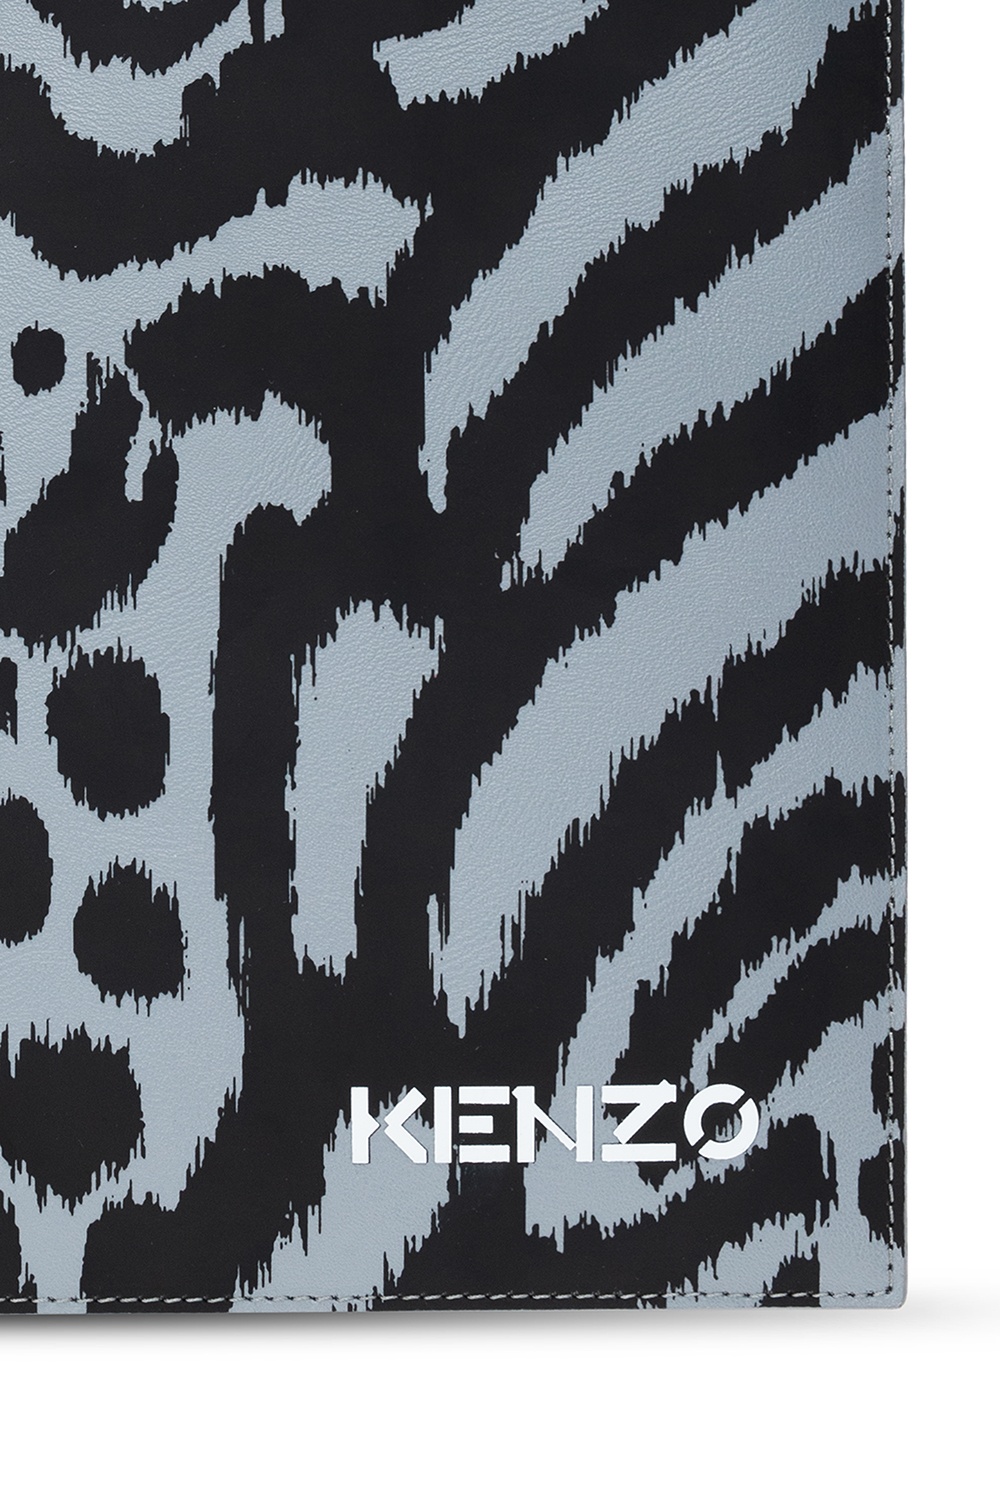 Kenzo Download the updated version of the app